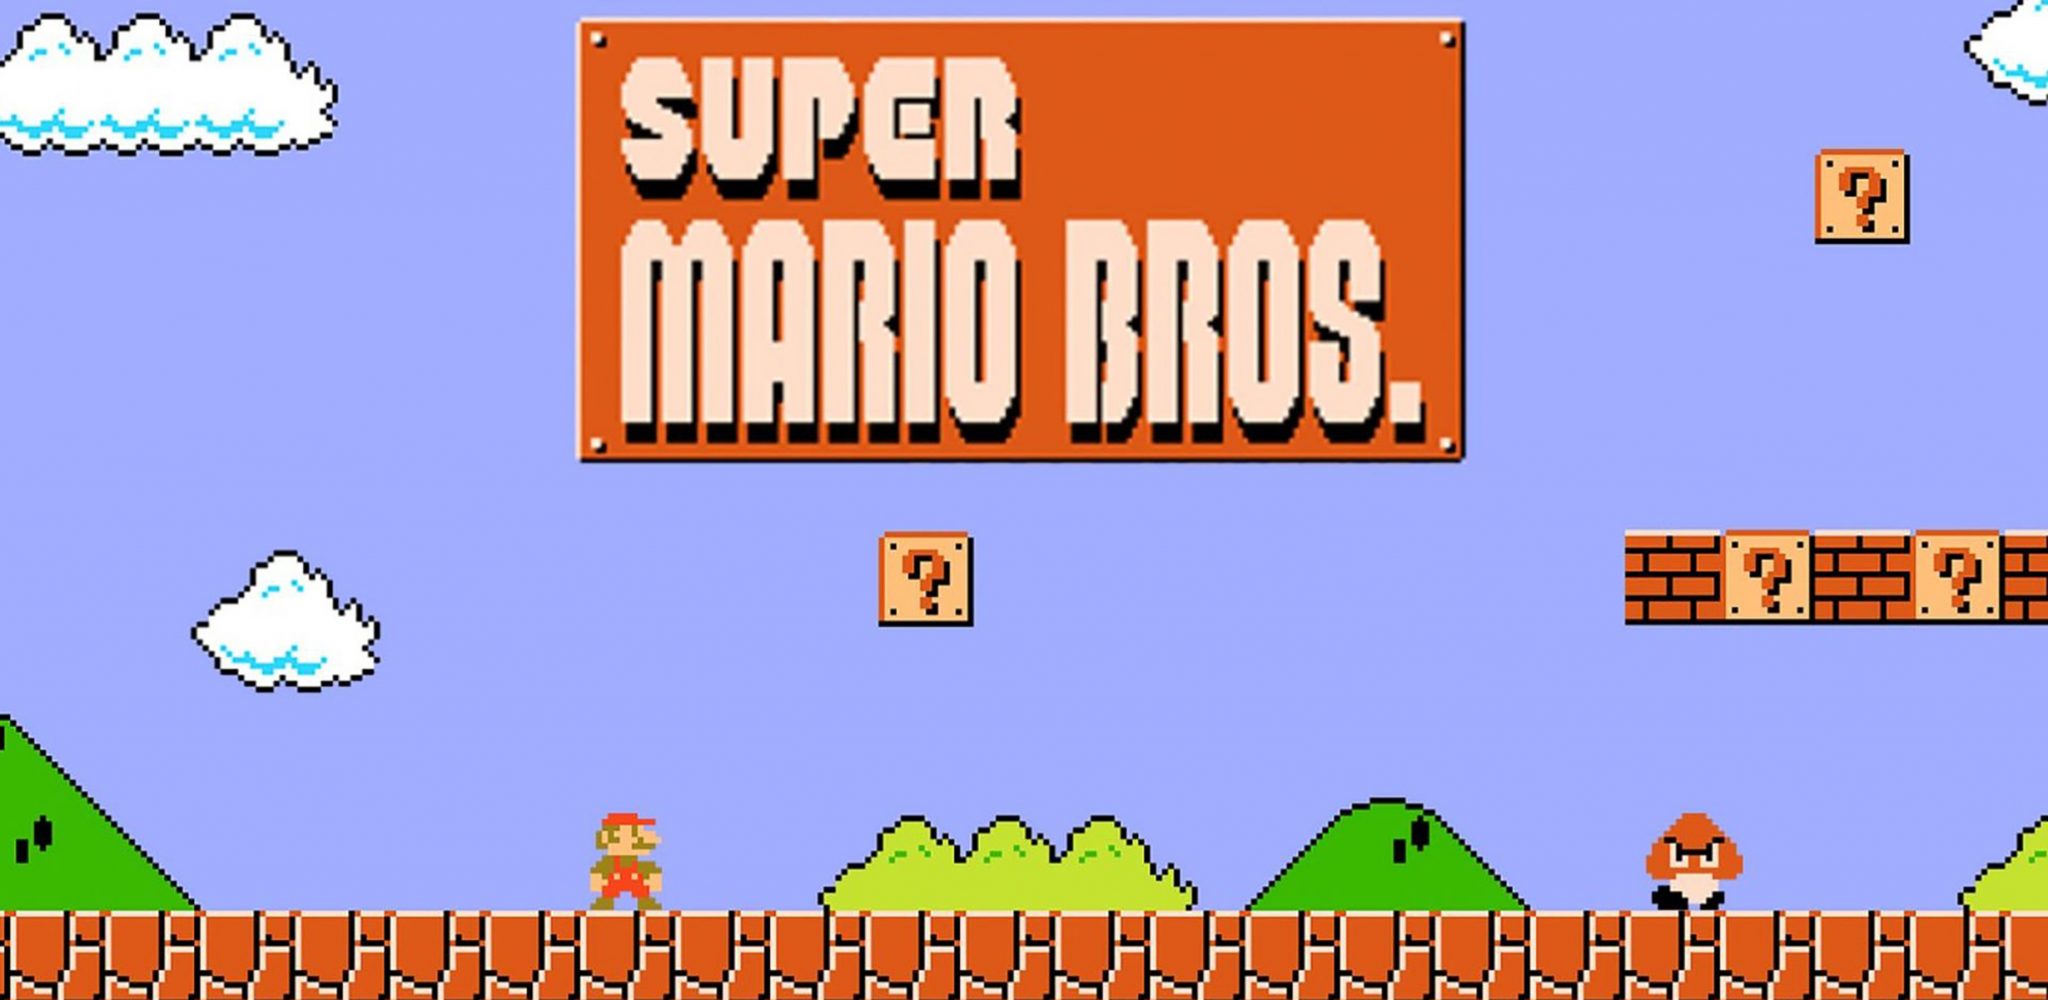 Super Mario Bros 35 Review: Console Gaming's Oldest Dog Learns A